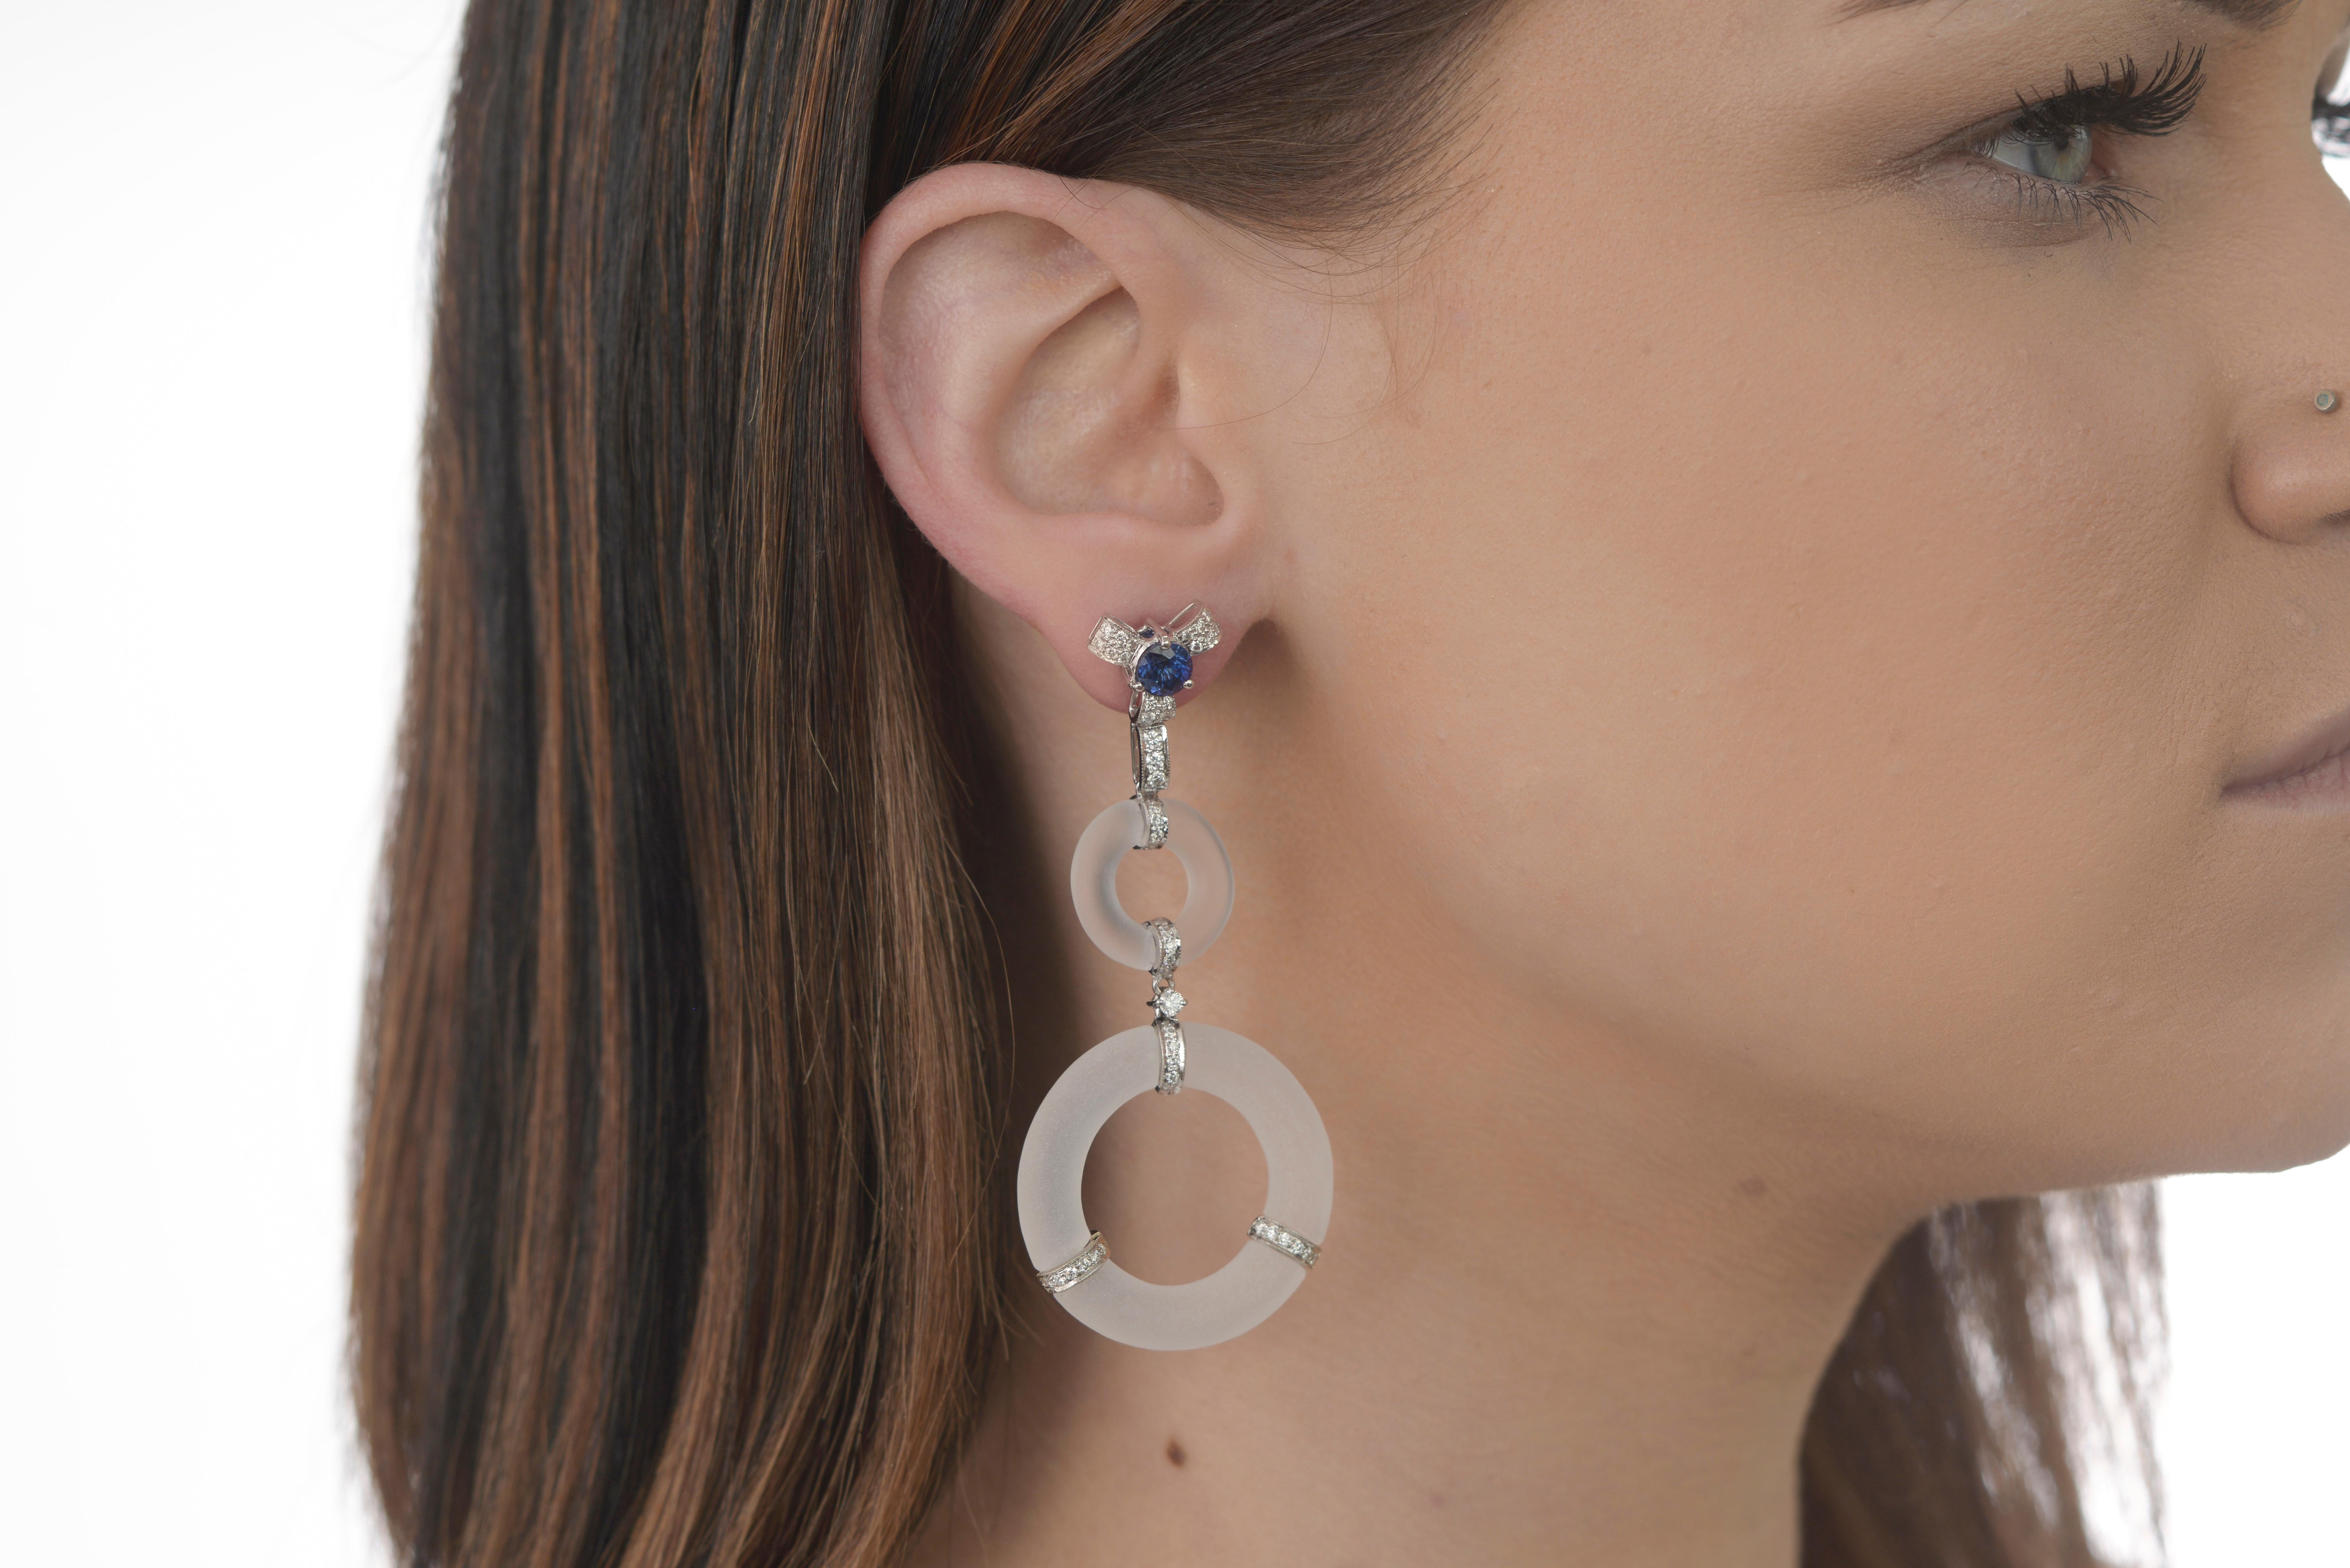 Ornate details and colorful gems create a stunning display of artistry in Ri Noor's Rock Crystal Circles Blue Sapphire and Diamond Earrings. The earrings mix shapes and materials in a unique way which makes a special statement that elevates any